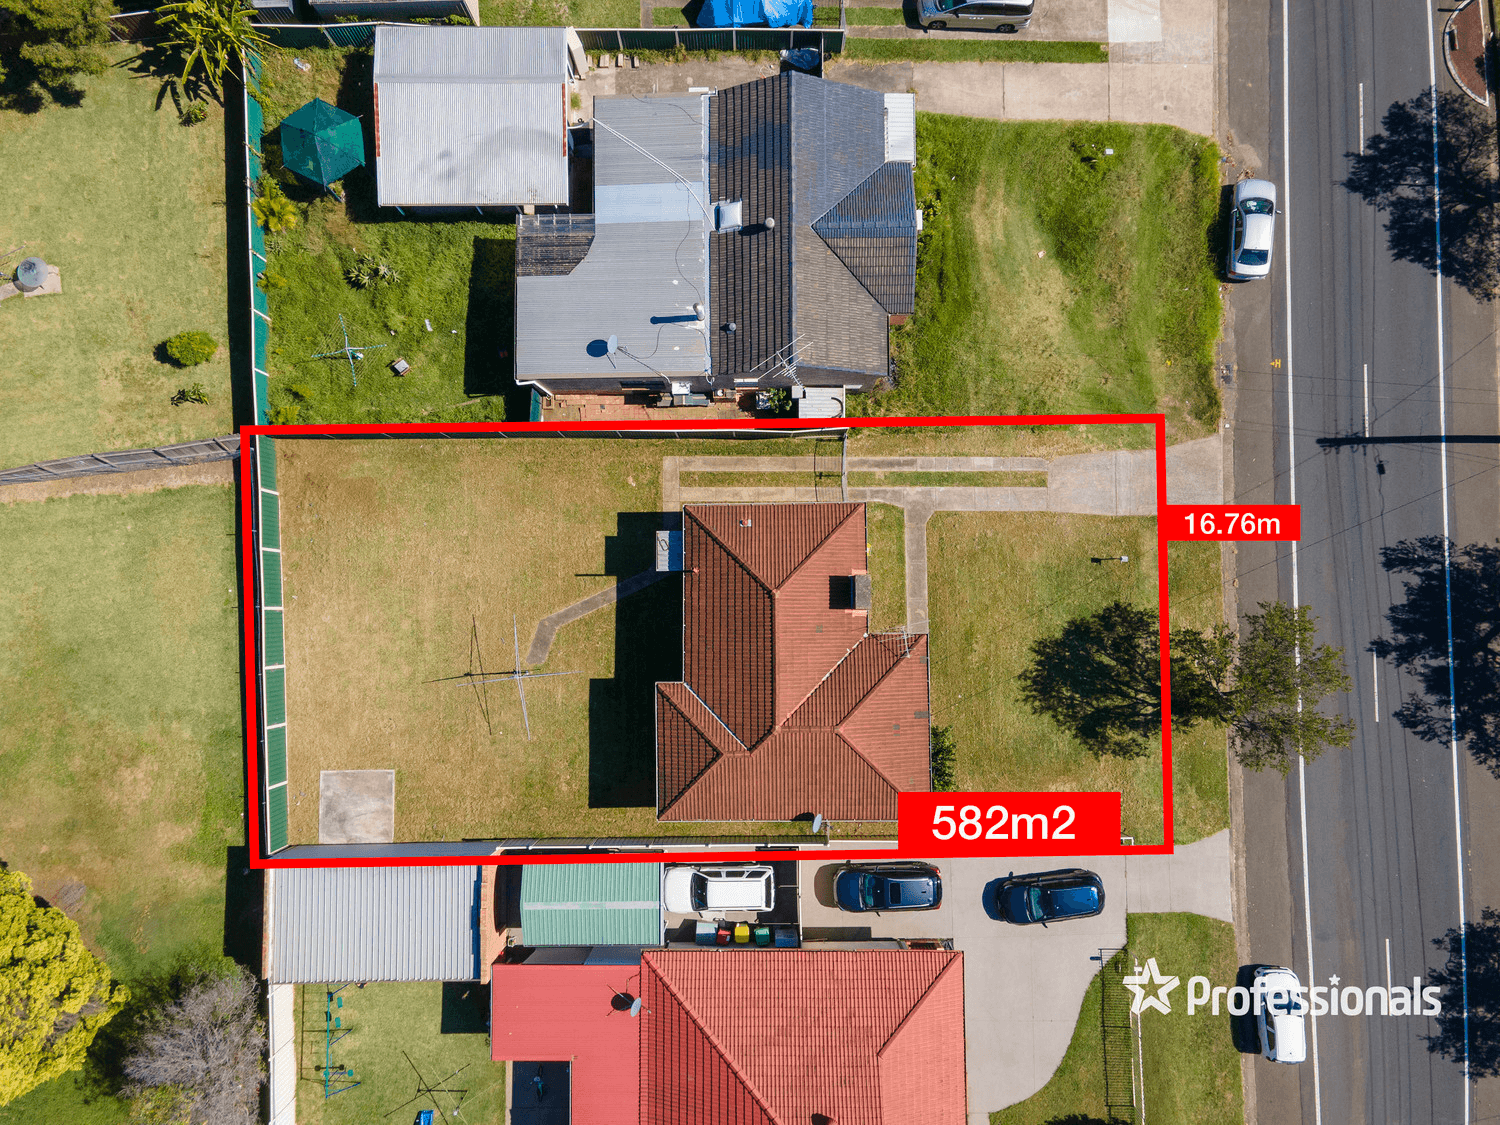 41 Horsley Road, Revesby, NSW 2212